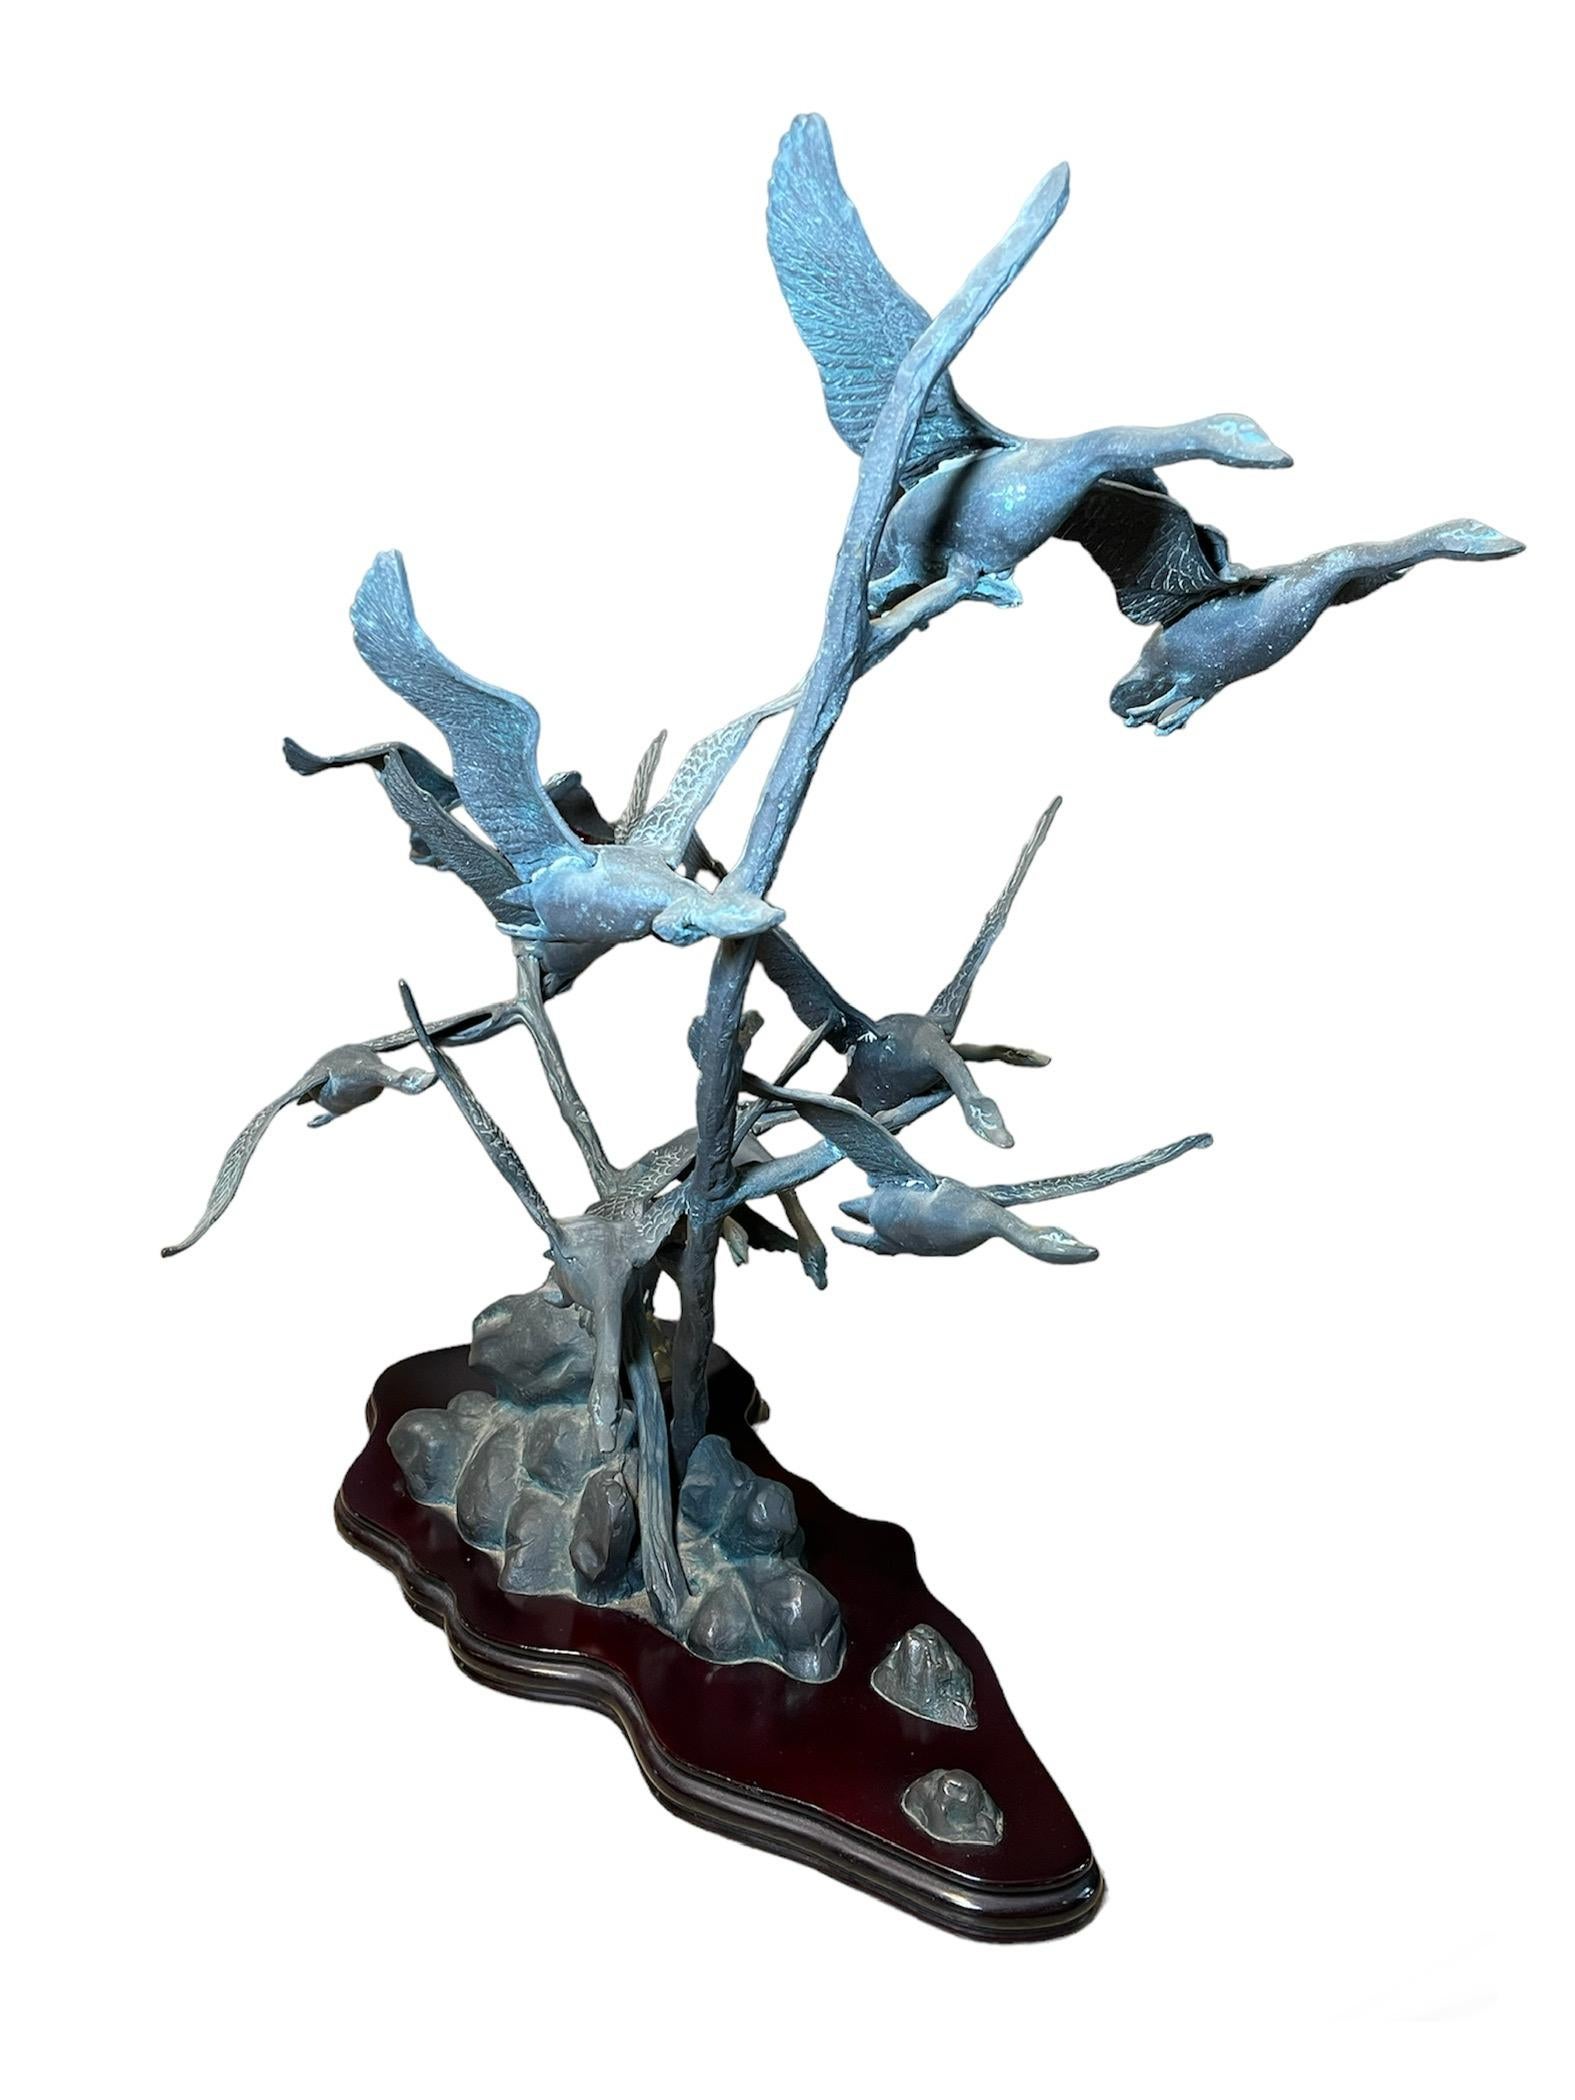 This is a Bronze Group Sculpture of Gulls. It depicts a large bronze sculpture of a group of gulls emigrating over the sea while another one is standing over some rocks. The sculpture is supported by an asymmetrical large triangular wood base. It is